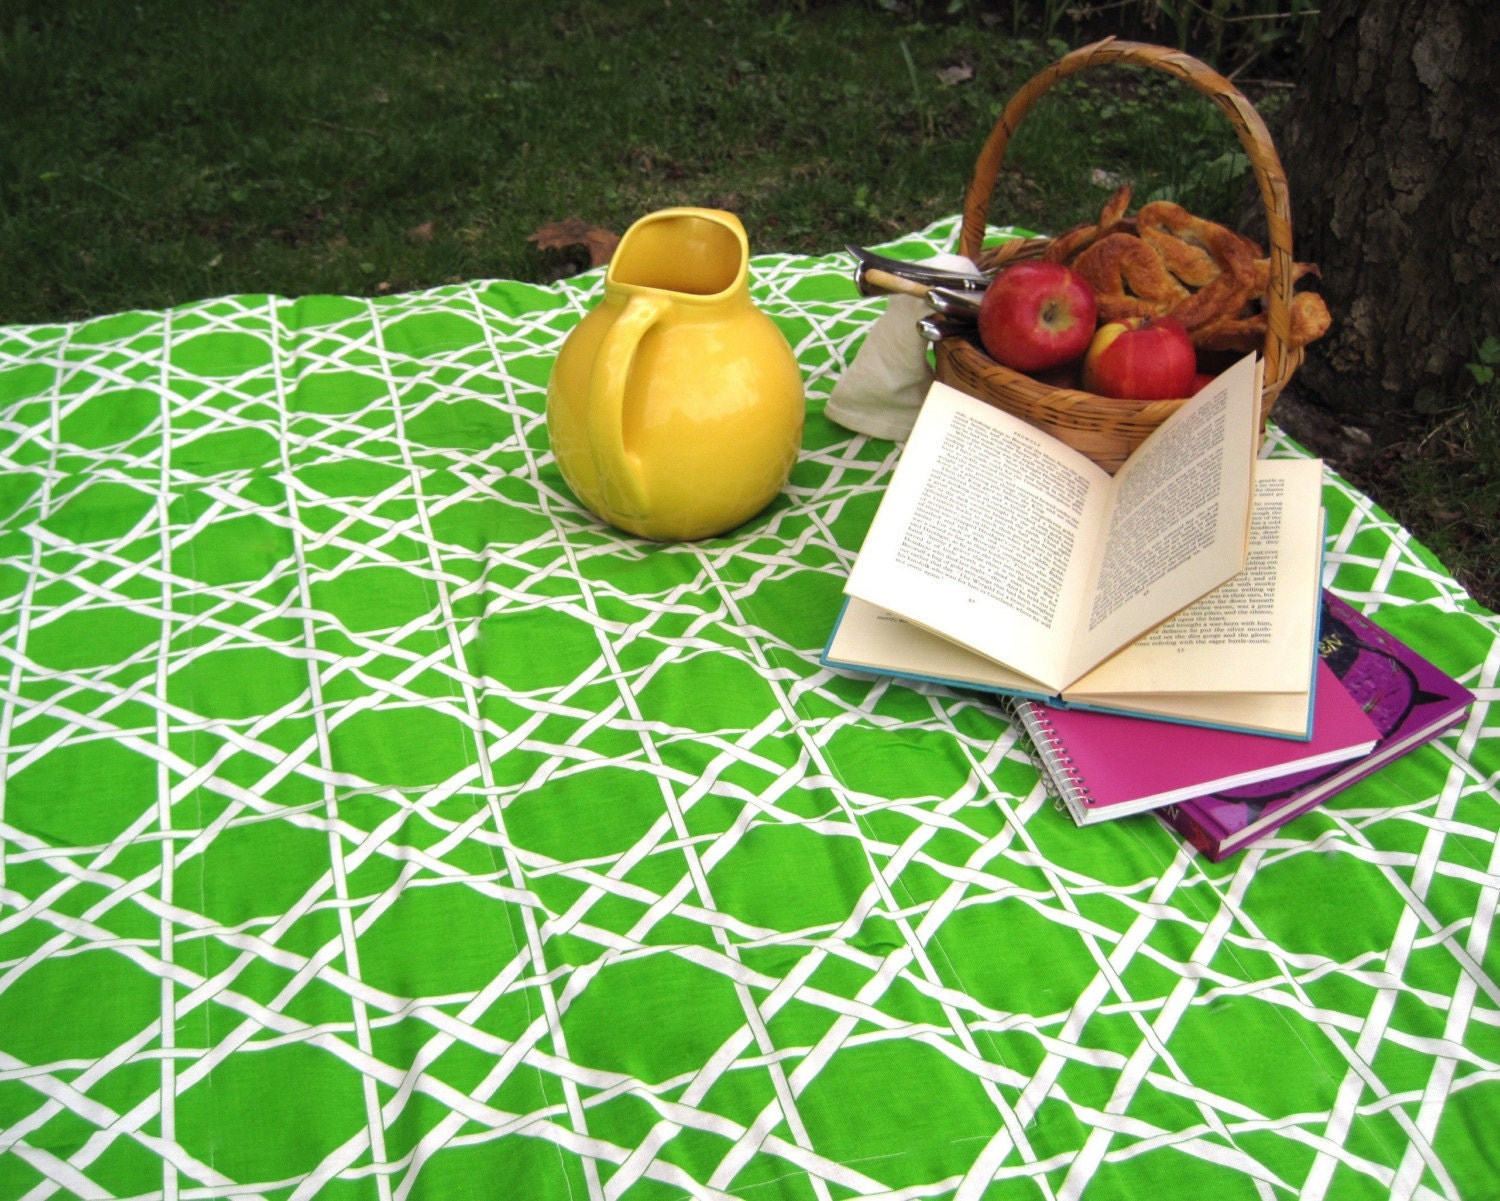 As seen on the cover of Detroit Home Magazine / upcycled vintage picnic blanket / eco friendly in green garden trellis (last 1)